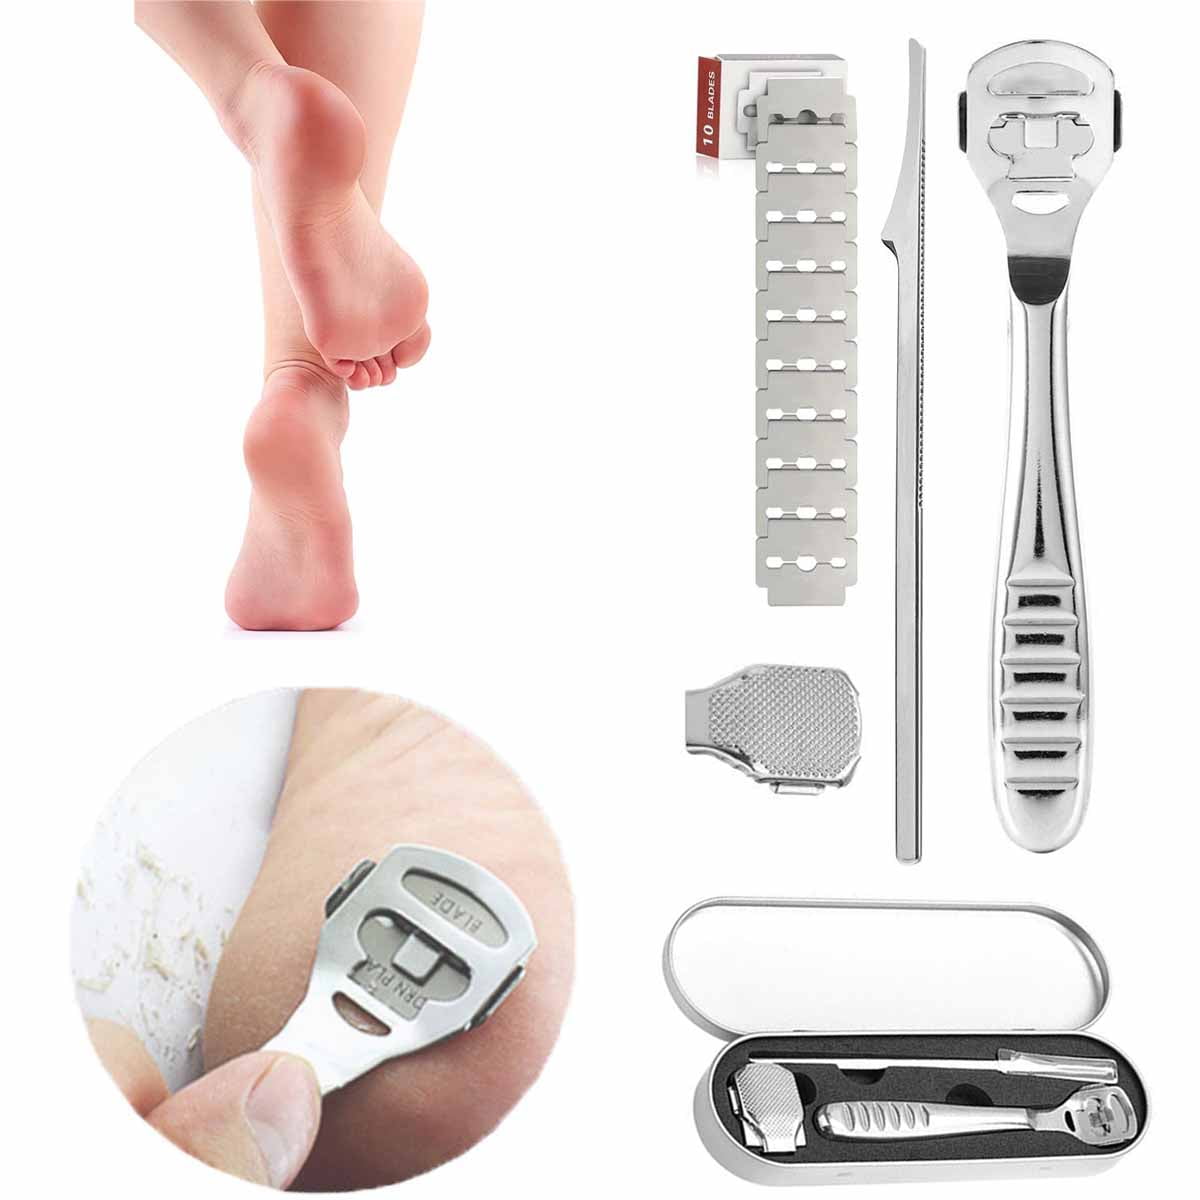 Pedicure Knife Tool Professional Stainless Steel Foot Scrubber Dead Skin  Remover 1pc Foot Scraper Knife To Remove Dead Skin Callus Knife Scraping  Pedicure Tool For Men Women Foot Care